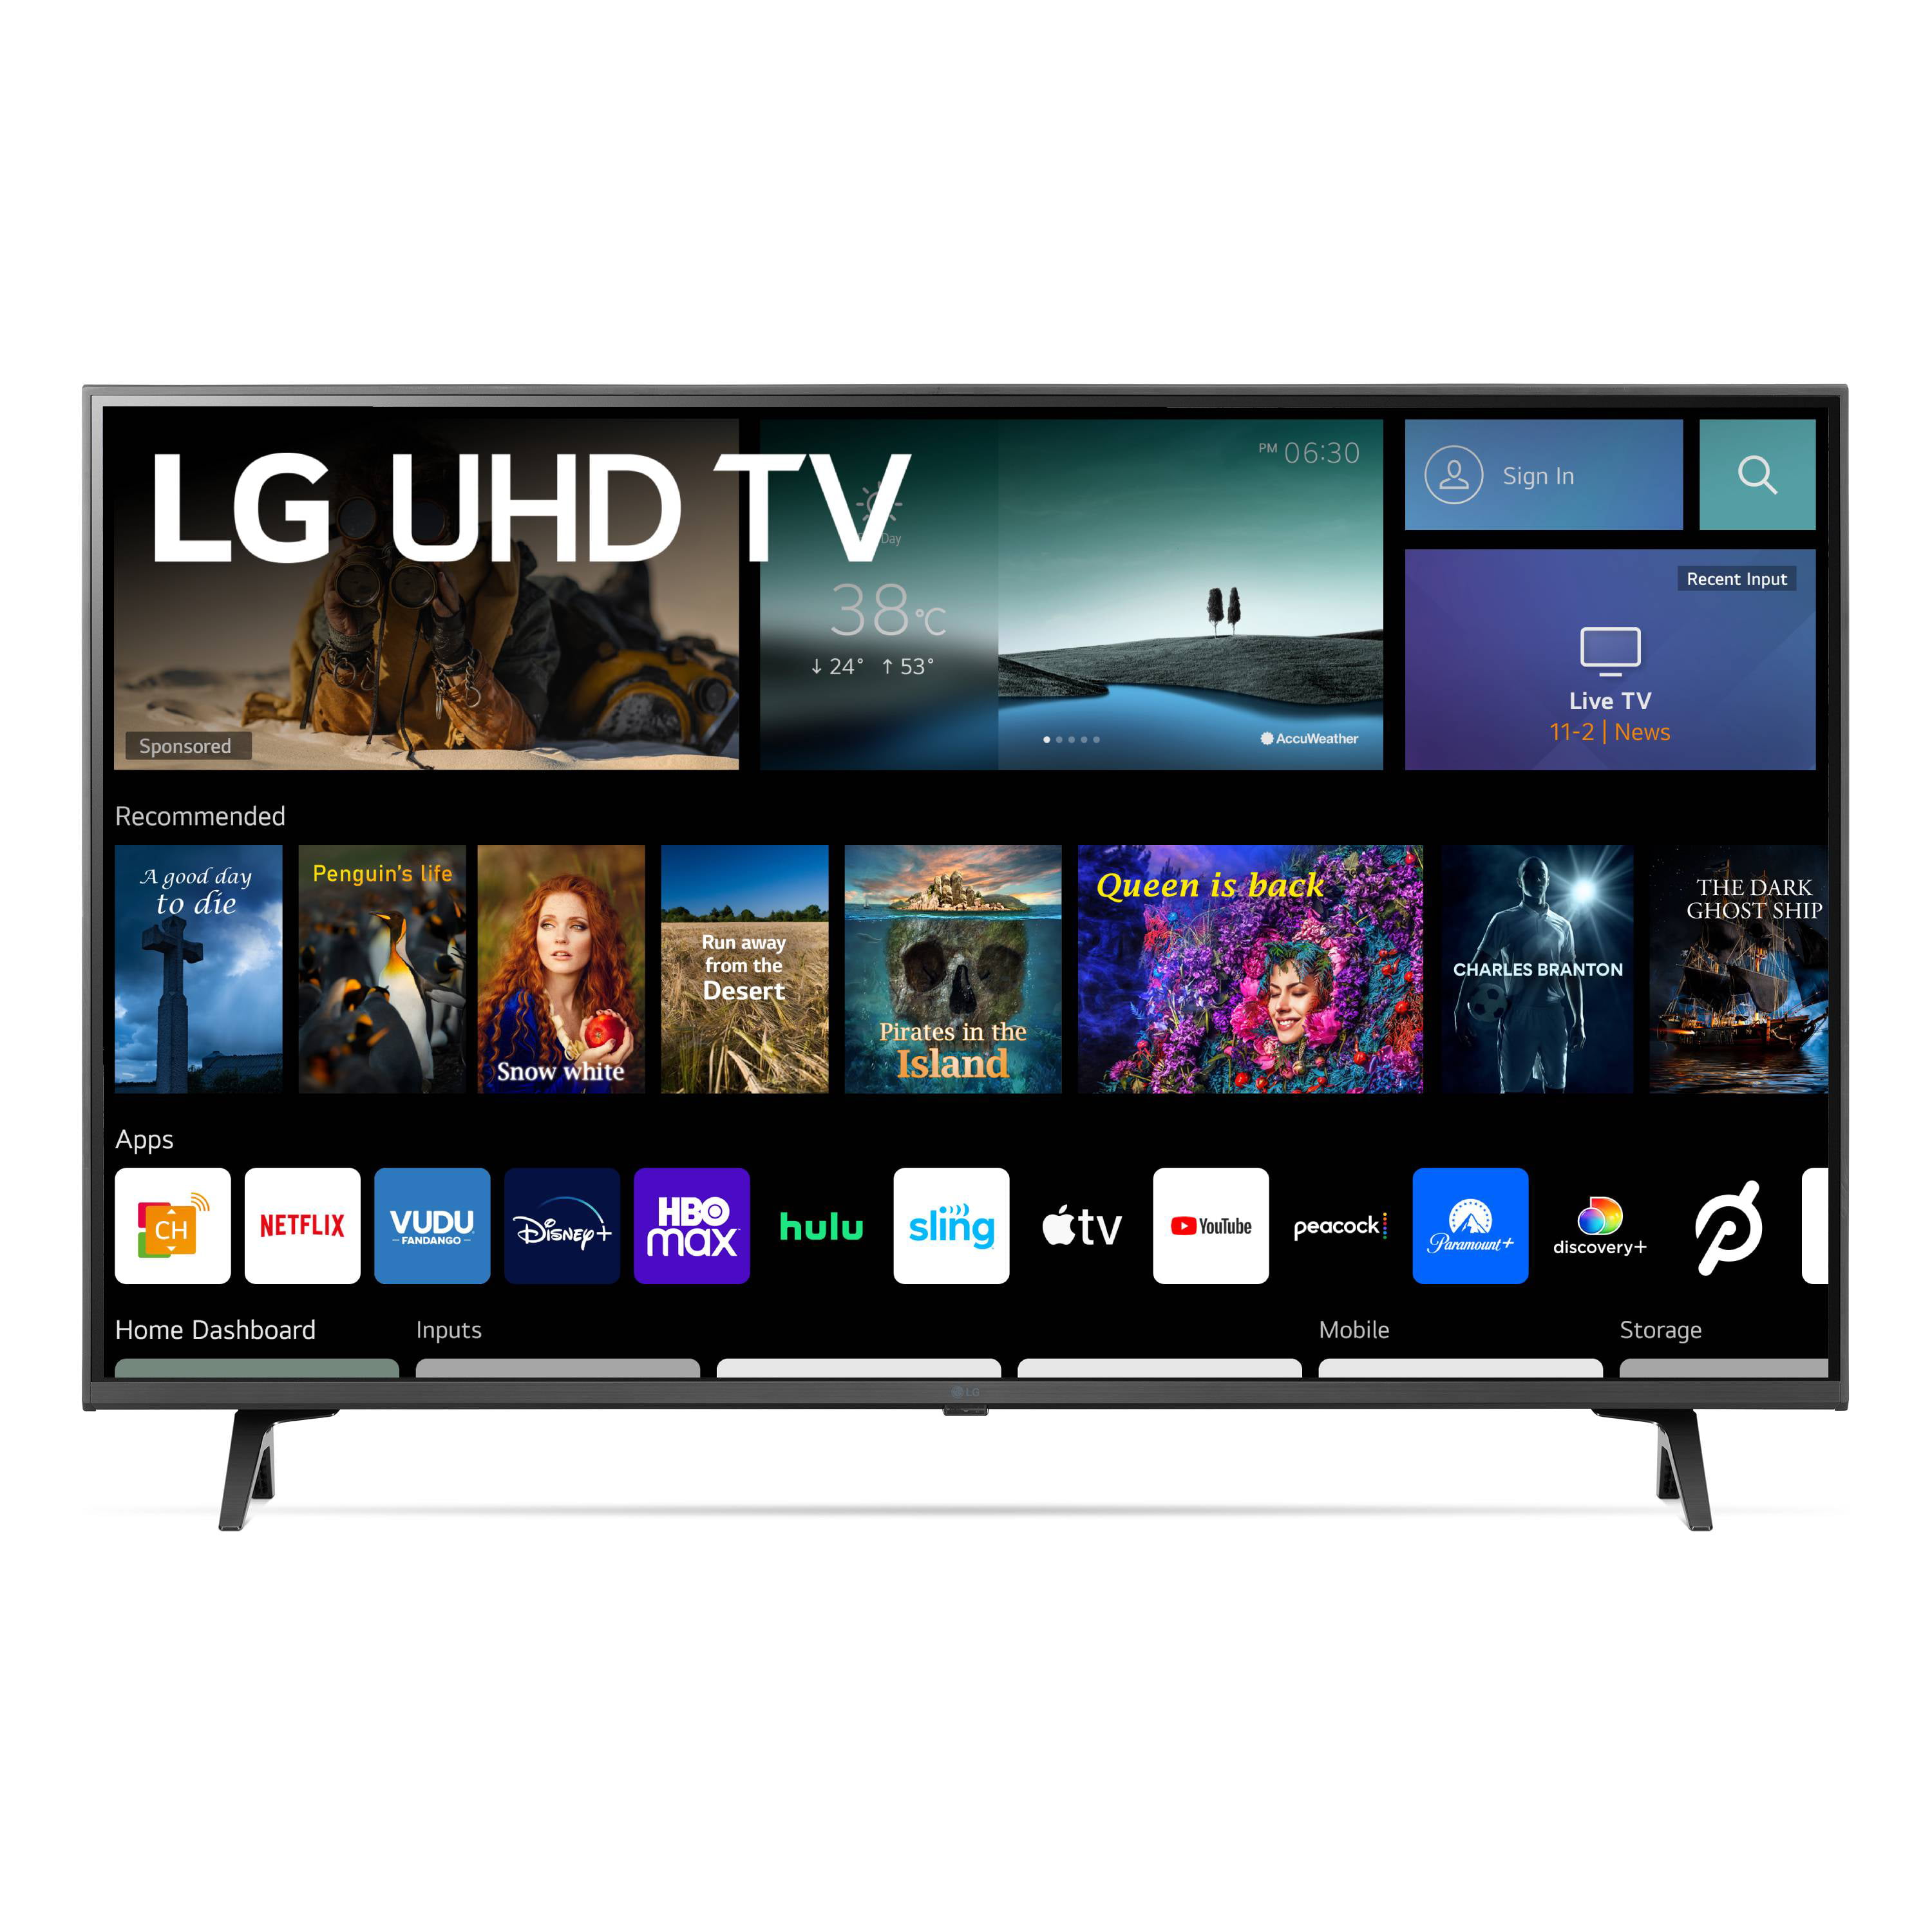 How to Restart Your LG TV? 11